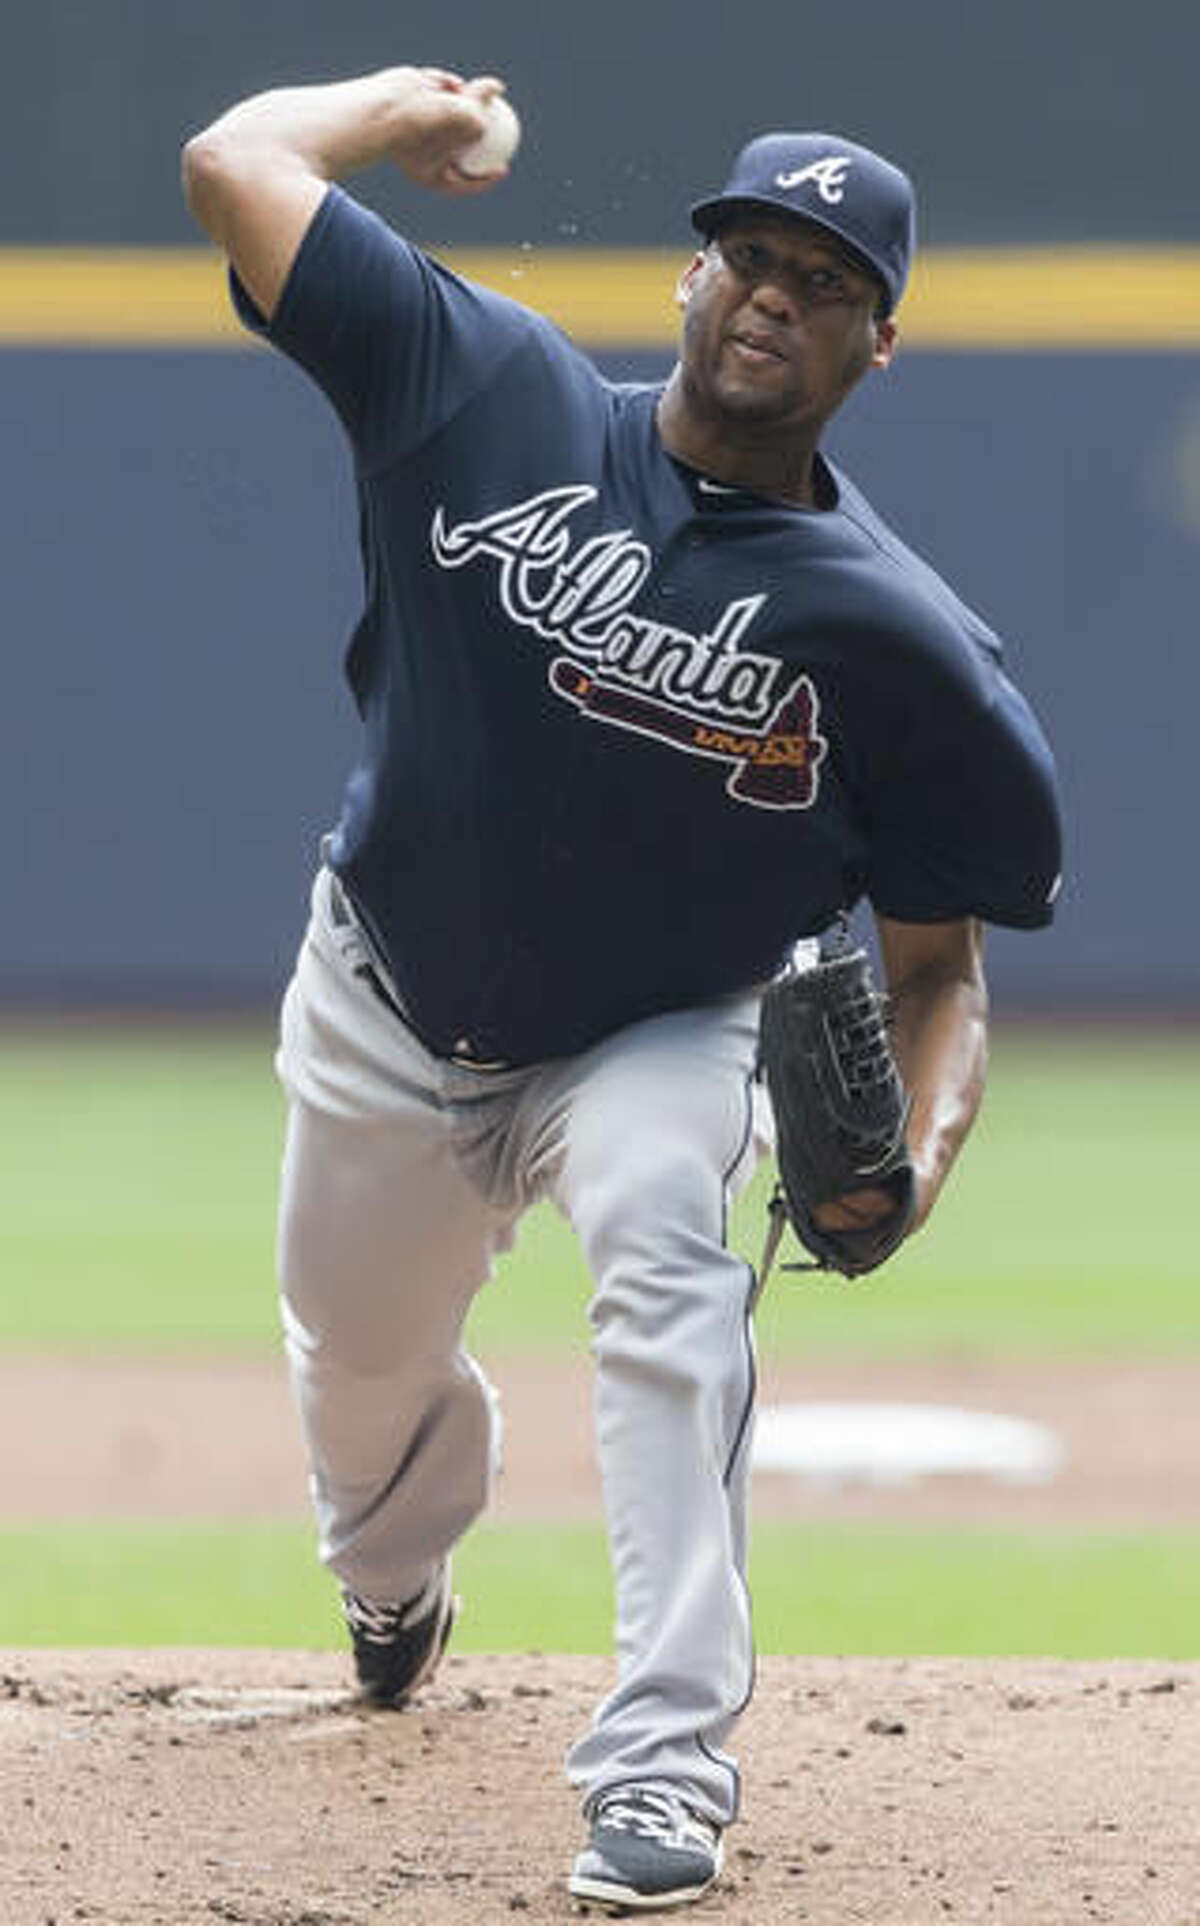 Atlanta Braves' Roberto Hernandez pitches to a Milwaukee Brewers' batter during the first inning of a baseball game Thursday, Aug. 11, 2016, in Milwaukee. (AP Photo/Tom Lynn)